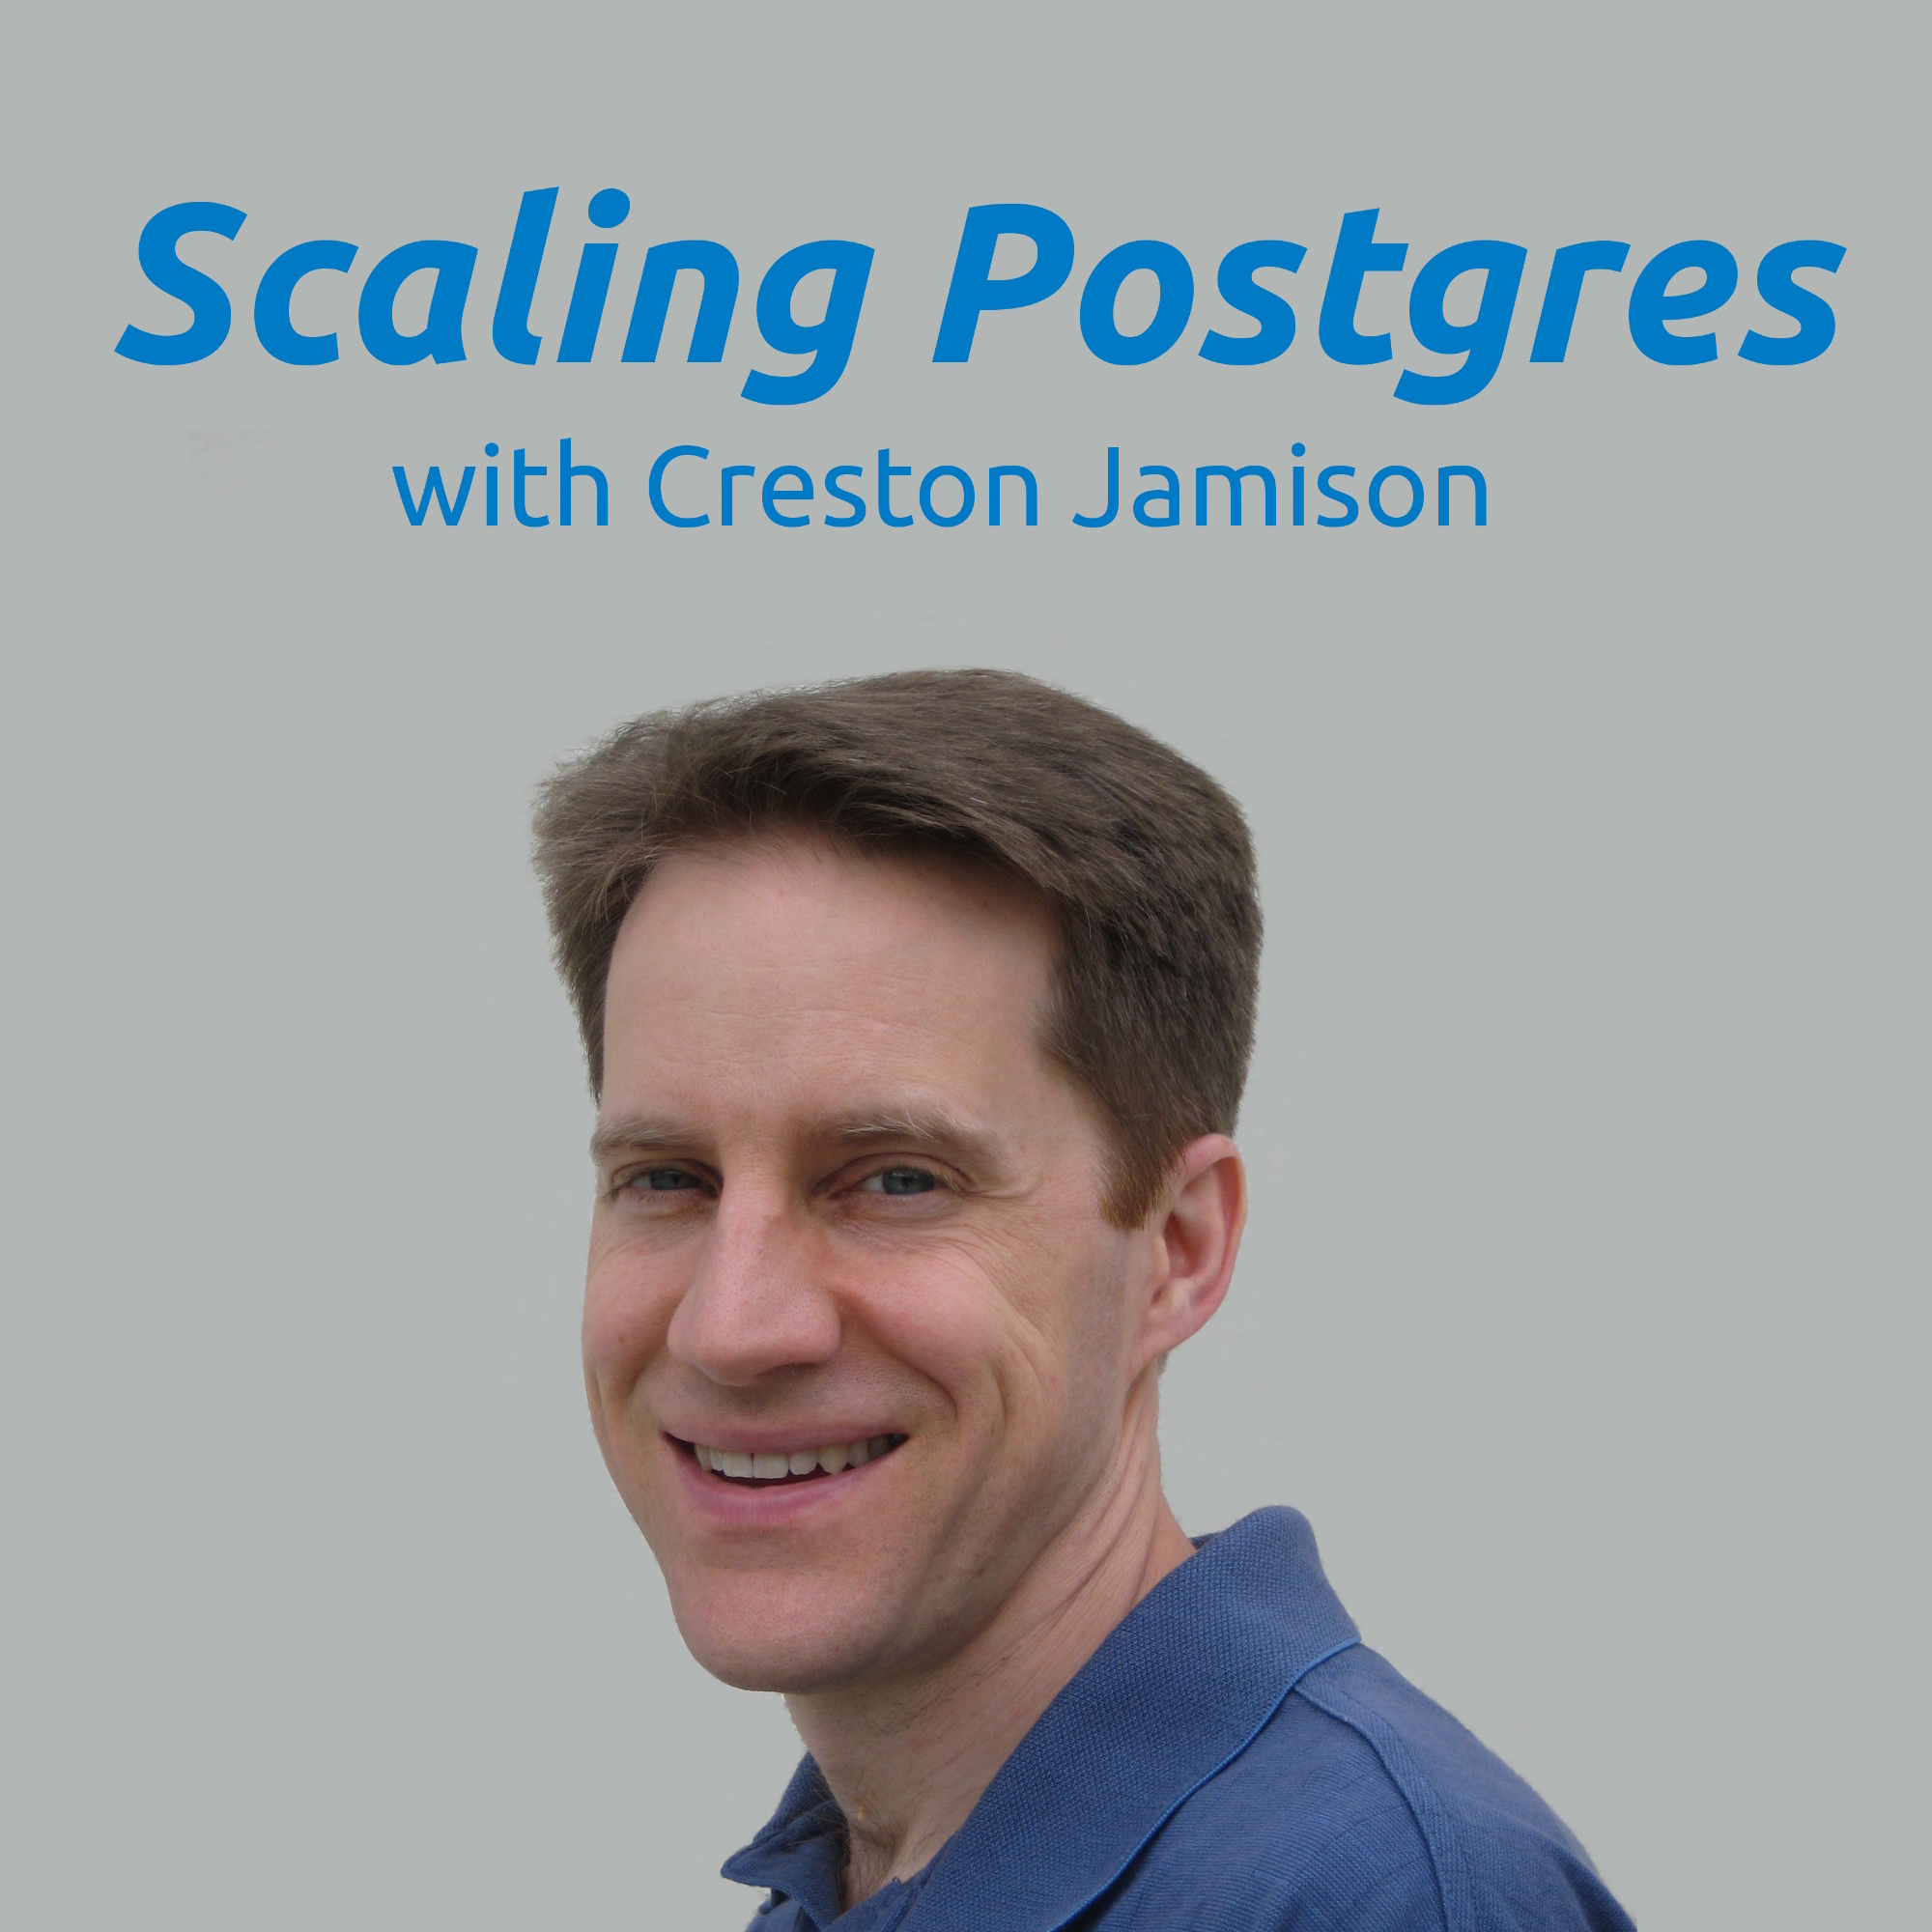 Popularity, Load Testing, Checksums, pg_hba | Scaling Postgres 59